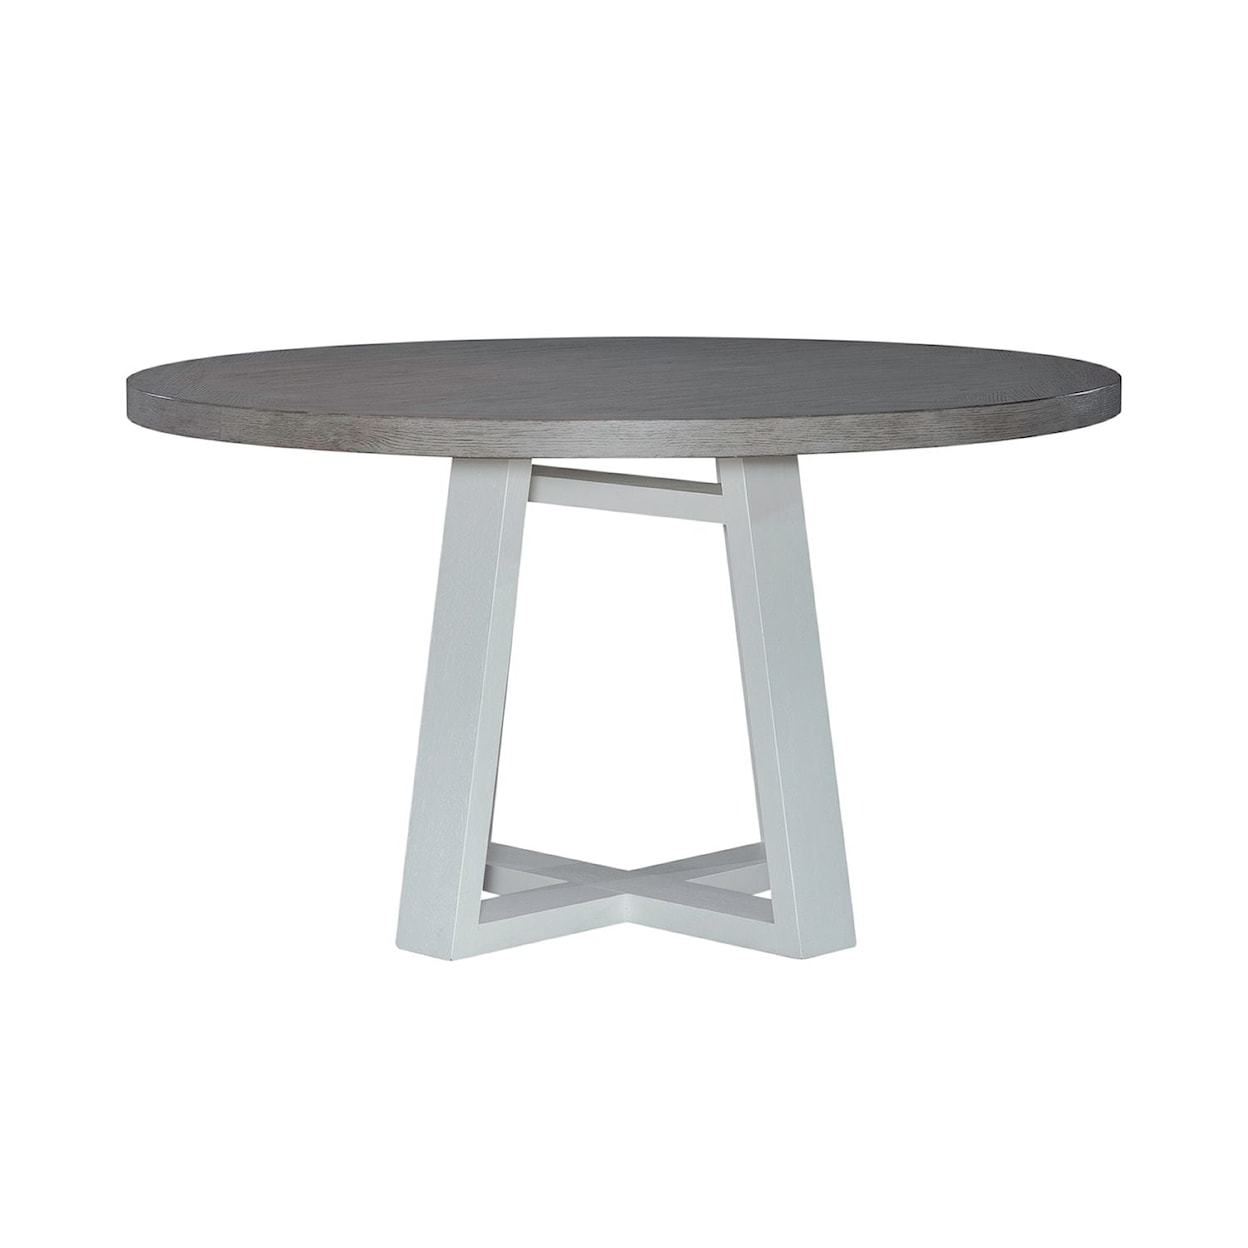 Libby Palmetto Heights Round Pedestal Dining Table